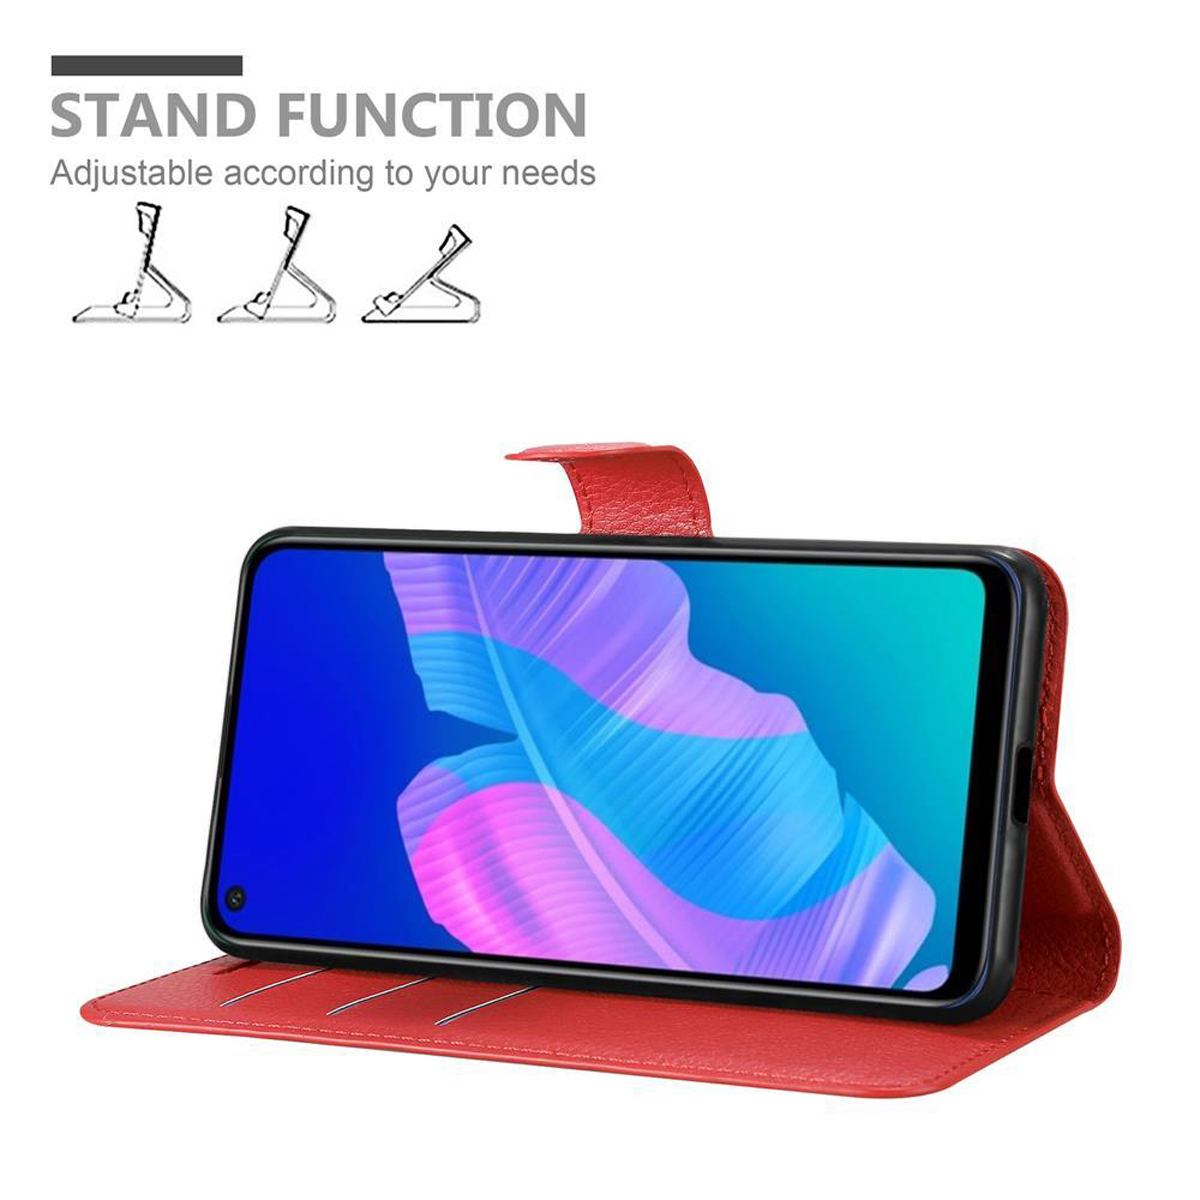 LITE P40 Standfunktion, Huawei, Book Hülle KARMIN CADORABO ROT Bookcover, E,